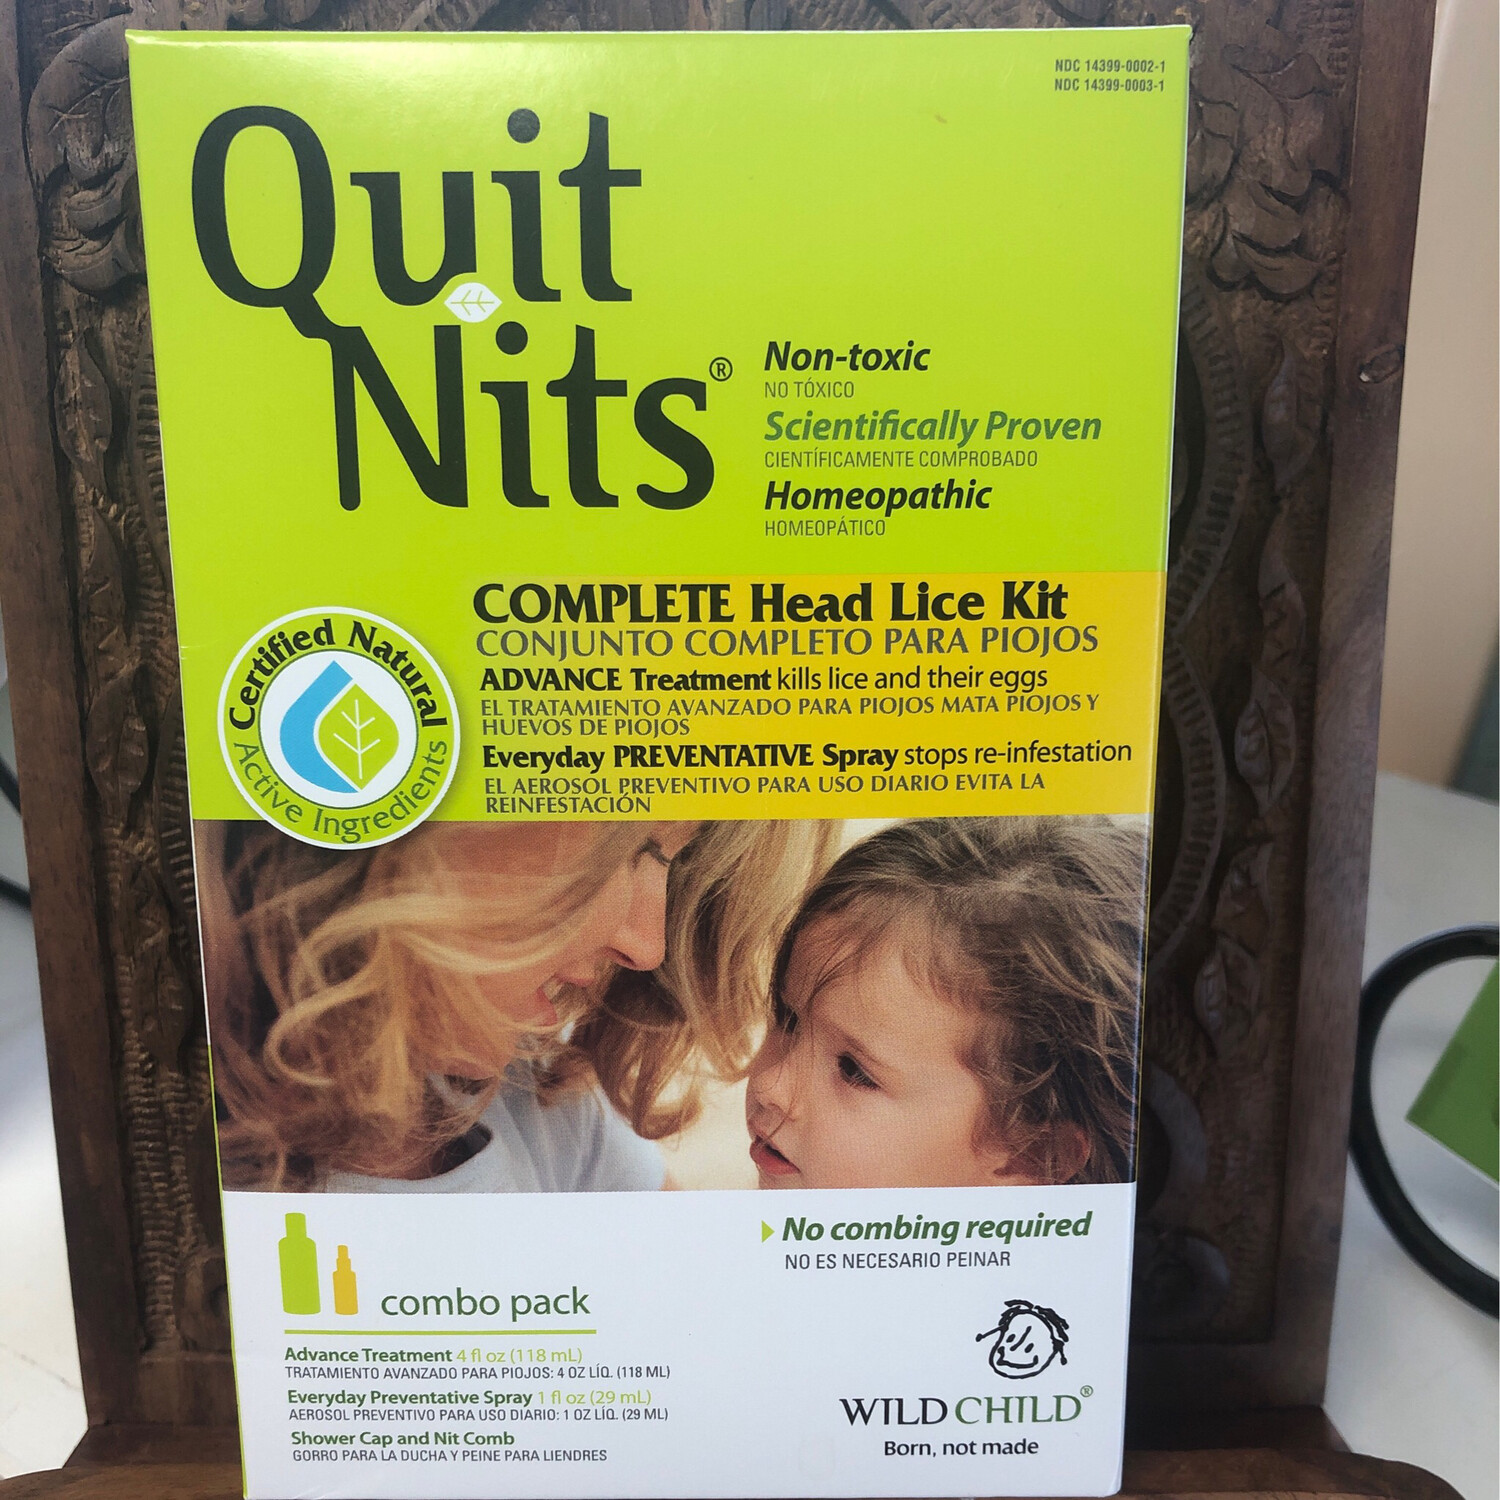 Quit Nits Complete Kit